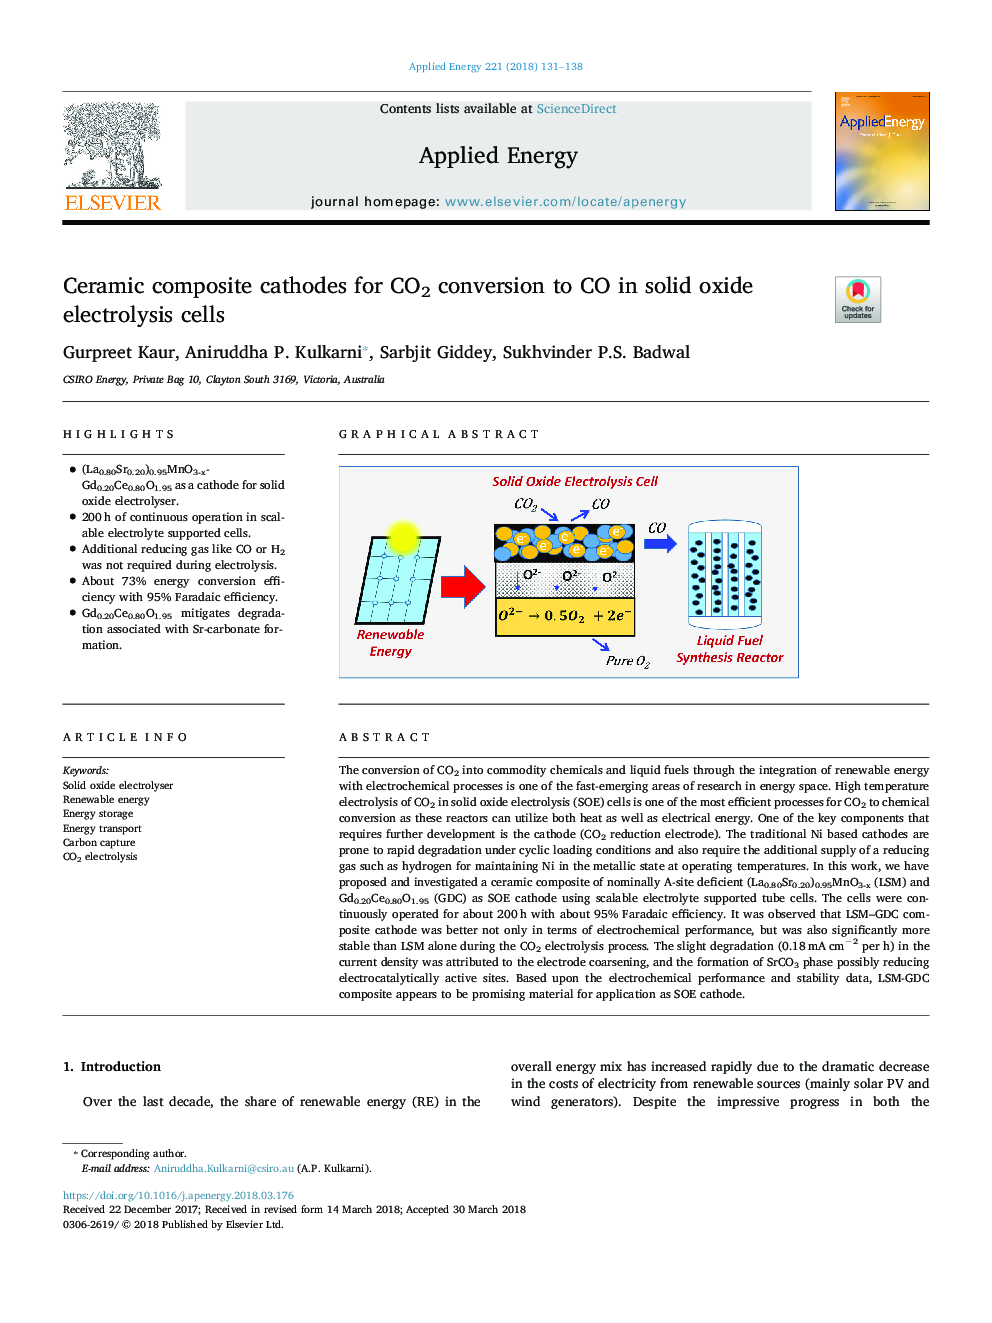 Ceramic composite cathodes for CO2 conversion to CO in solid oxide electrolysis cells